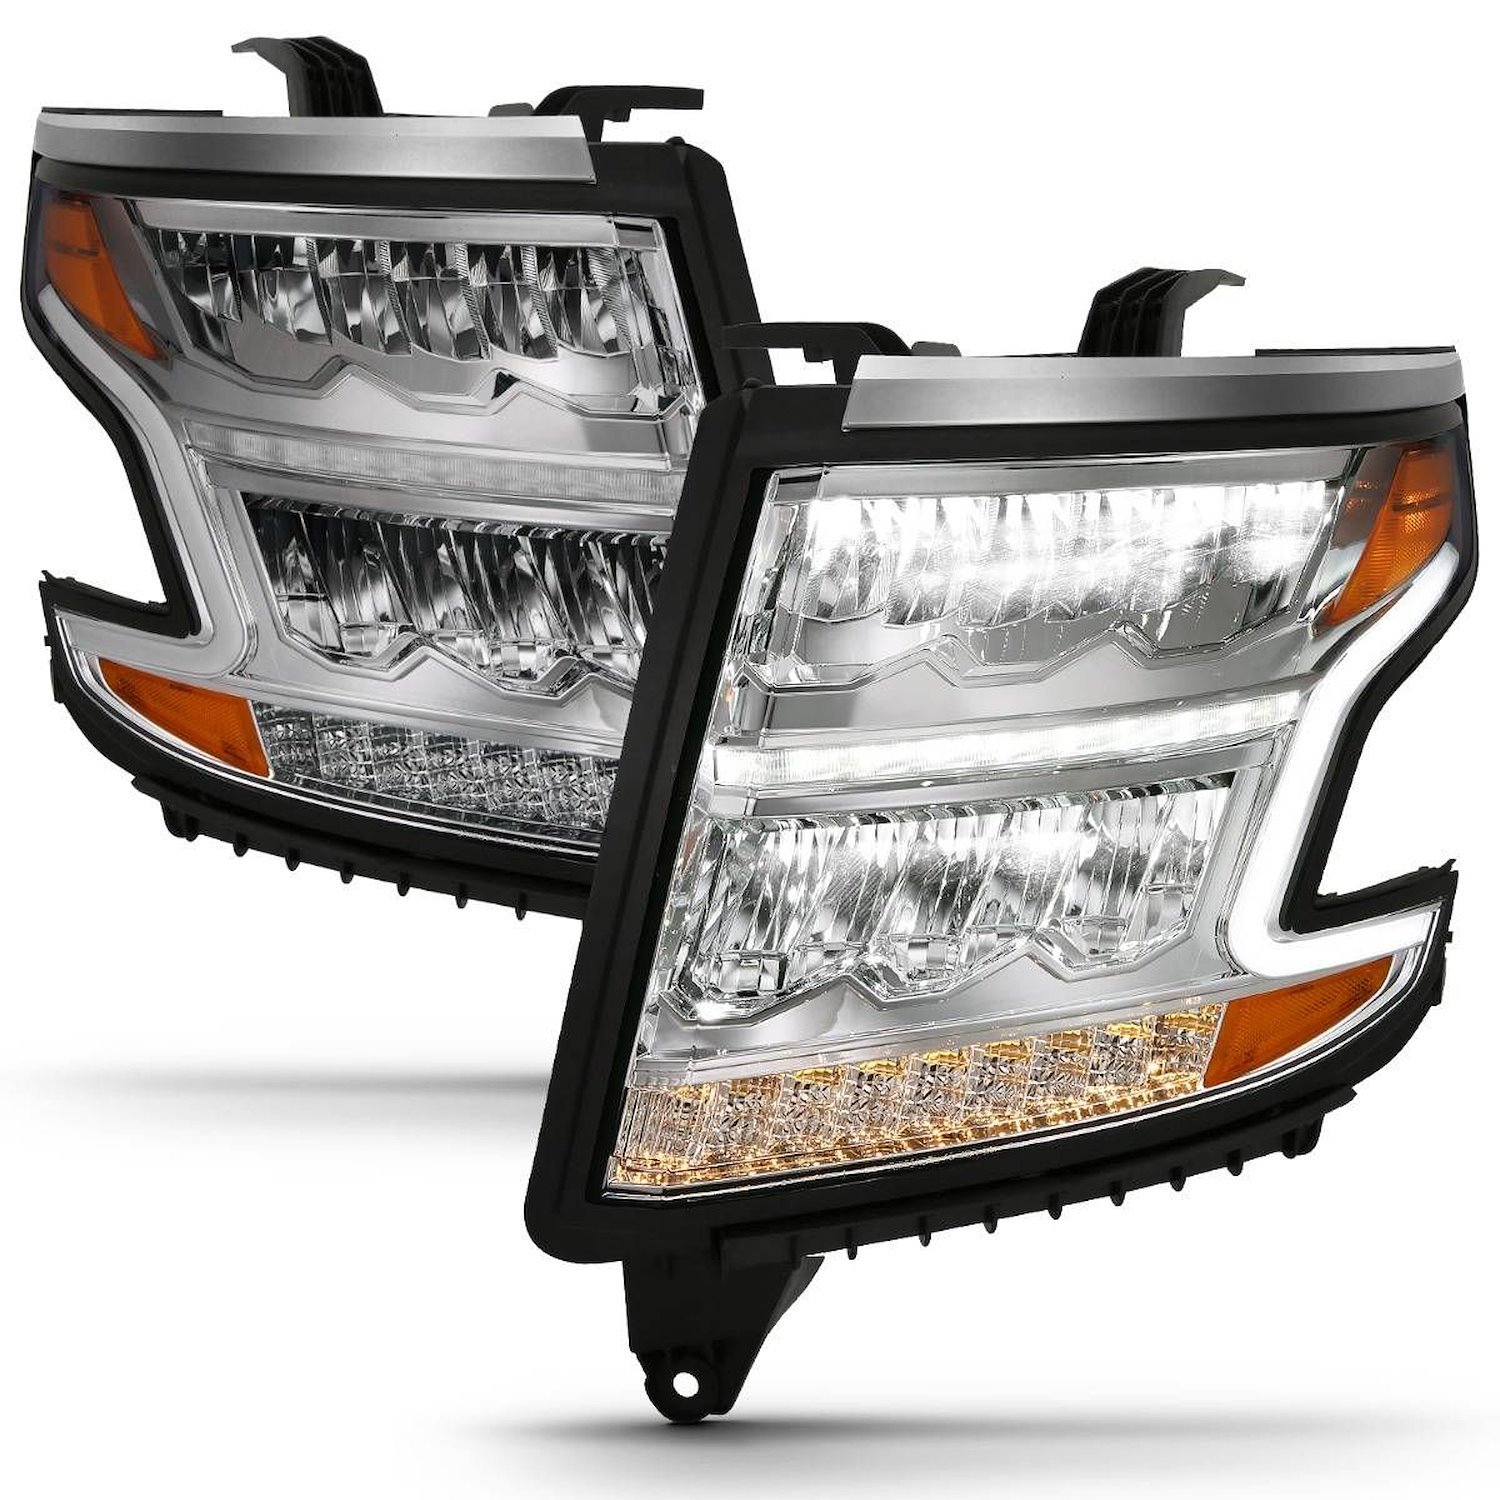 LED Chrome Housing Headlights For 2015-2020 Chevy Suburban, Tahoe [Amber Sequential Turn Signal]